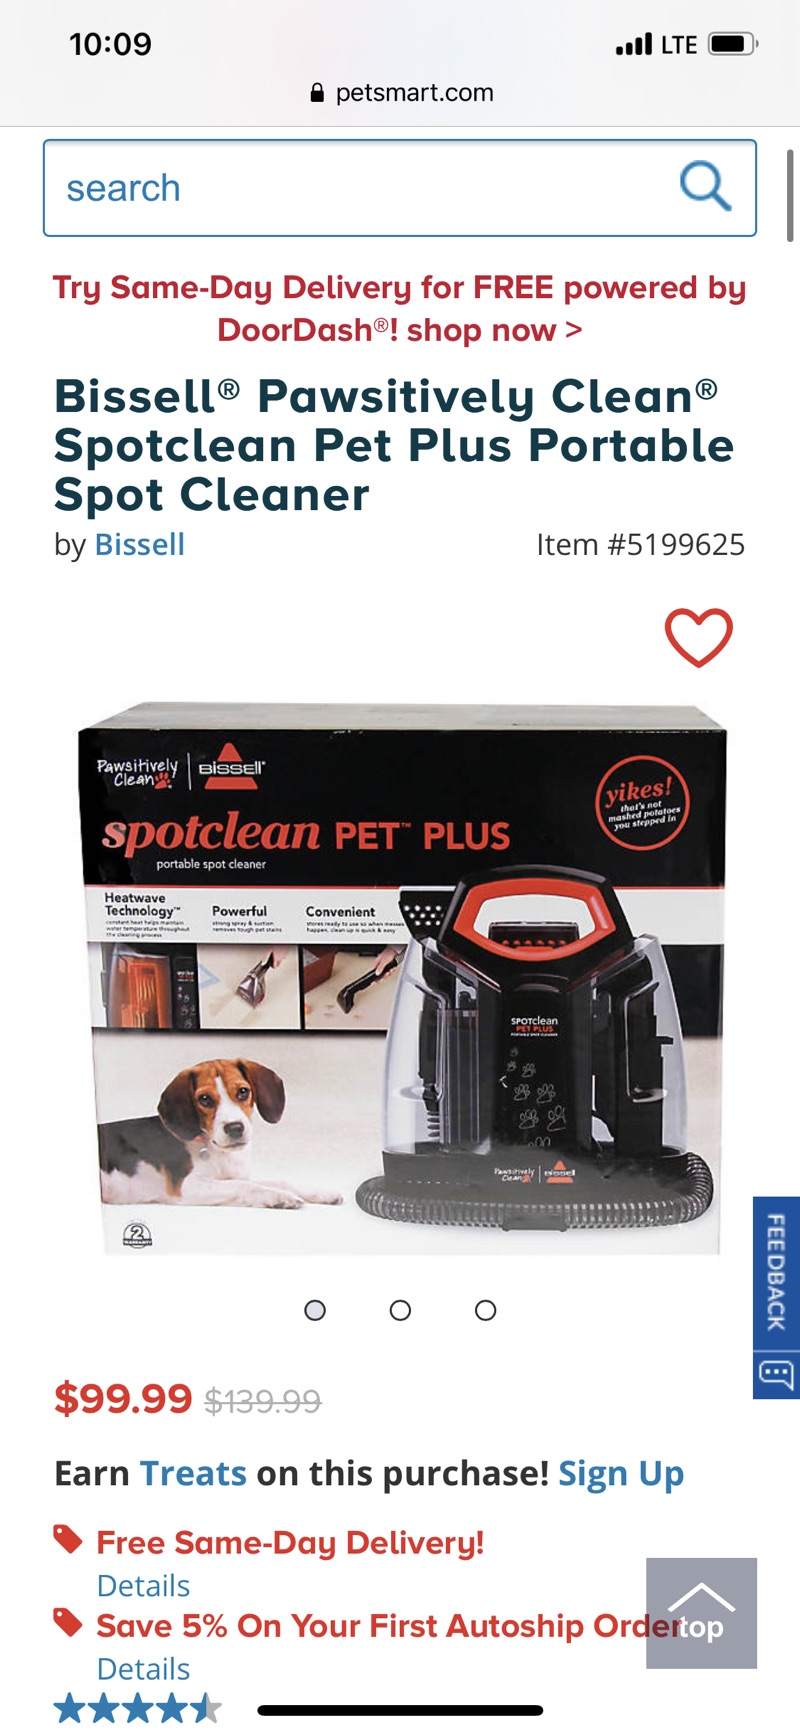 Bissell® Pawsitively Clean® Spotclean Pet Plus Portable Spot Cleaner 手持地毯清理机